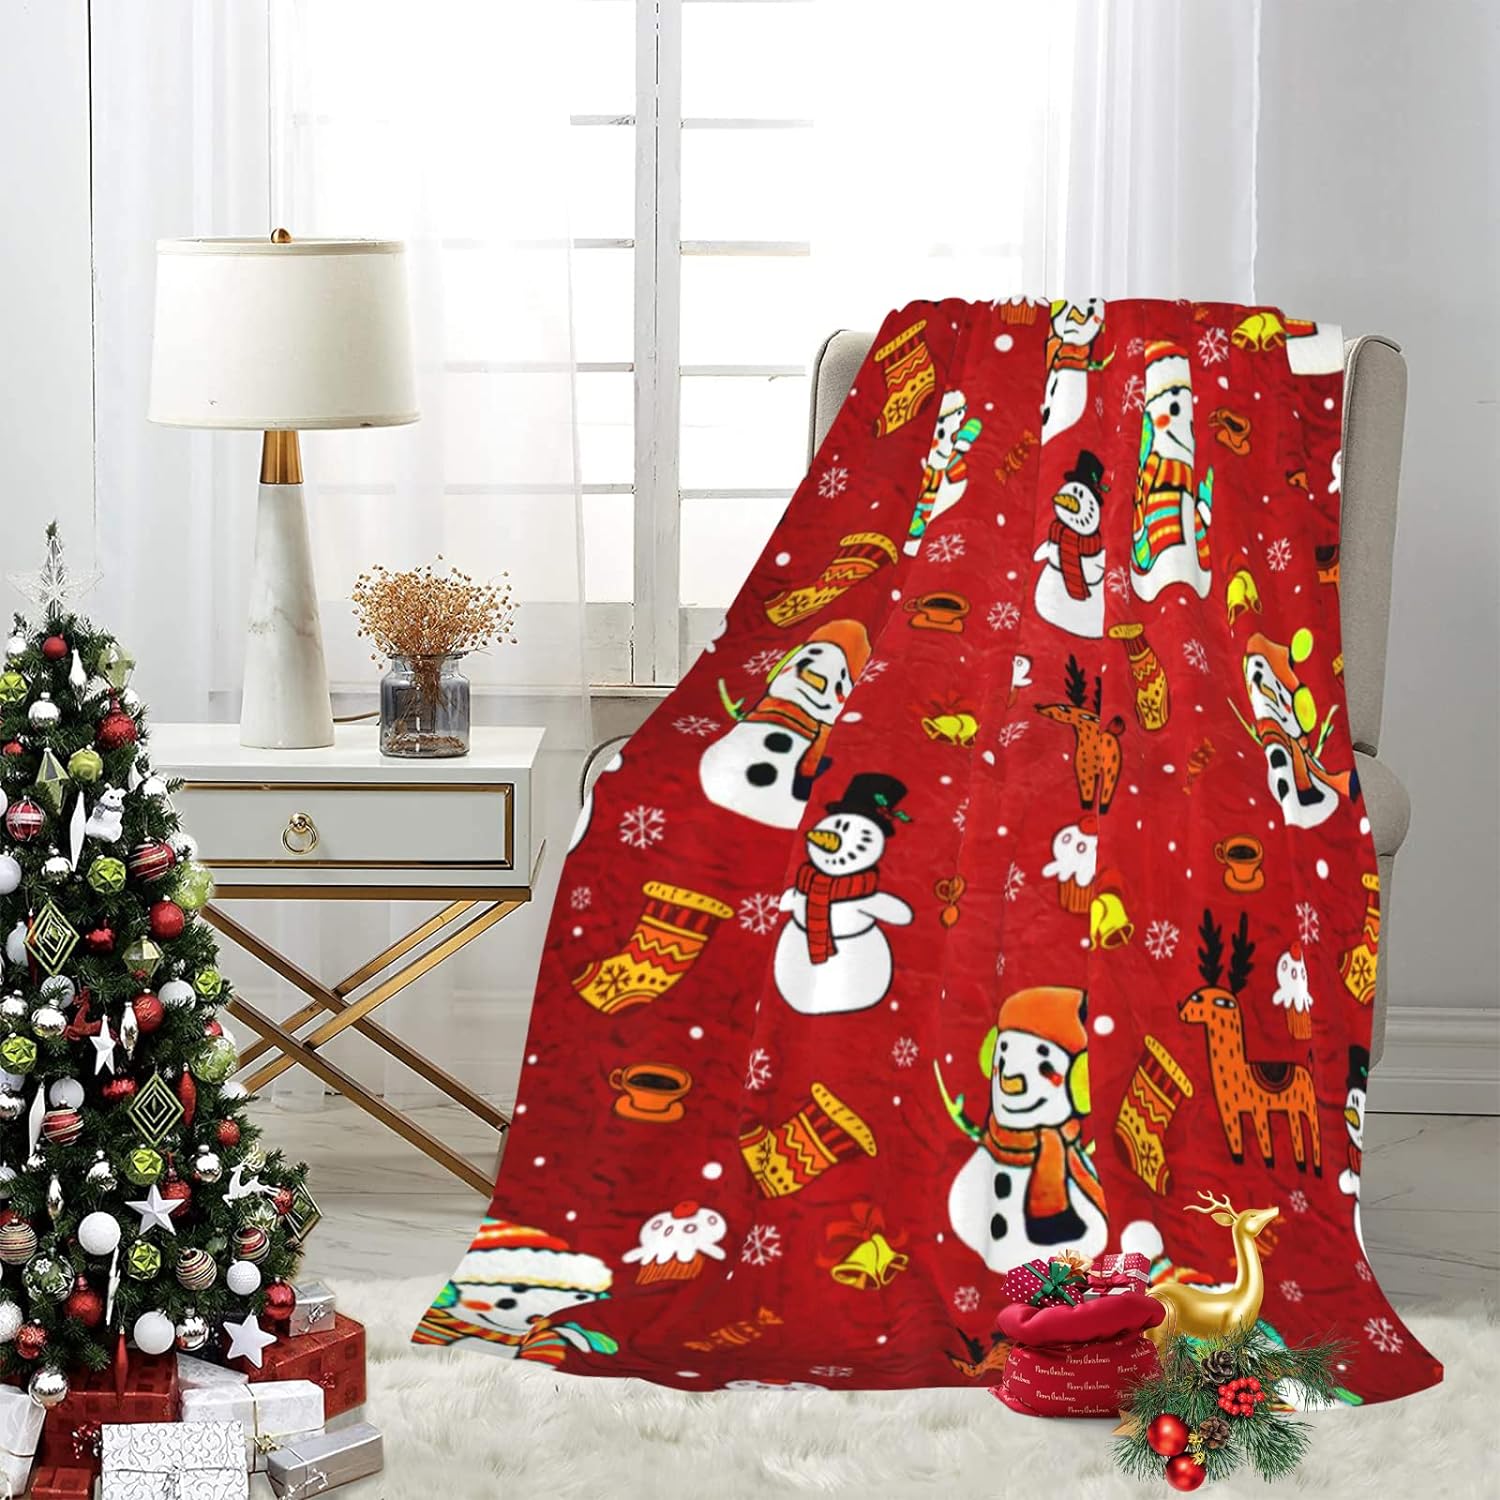 Great Choice Products Soft Plush Christmas Blanket,Christmas Snowman Deer Bell Socks Warm Throw Blanket For Couch, Seasonal Winter Xmas Holida…